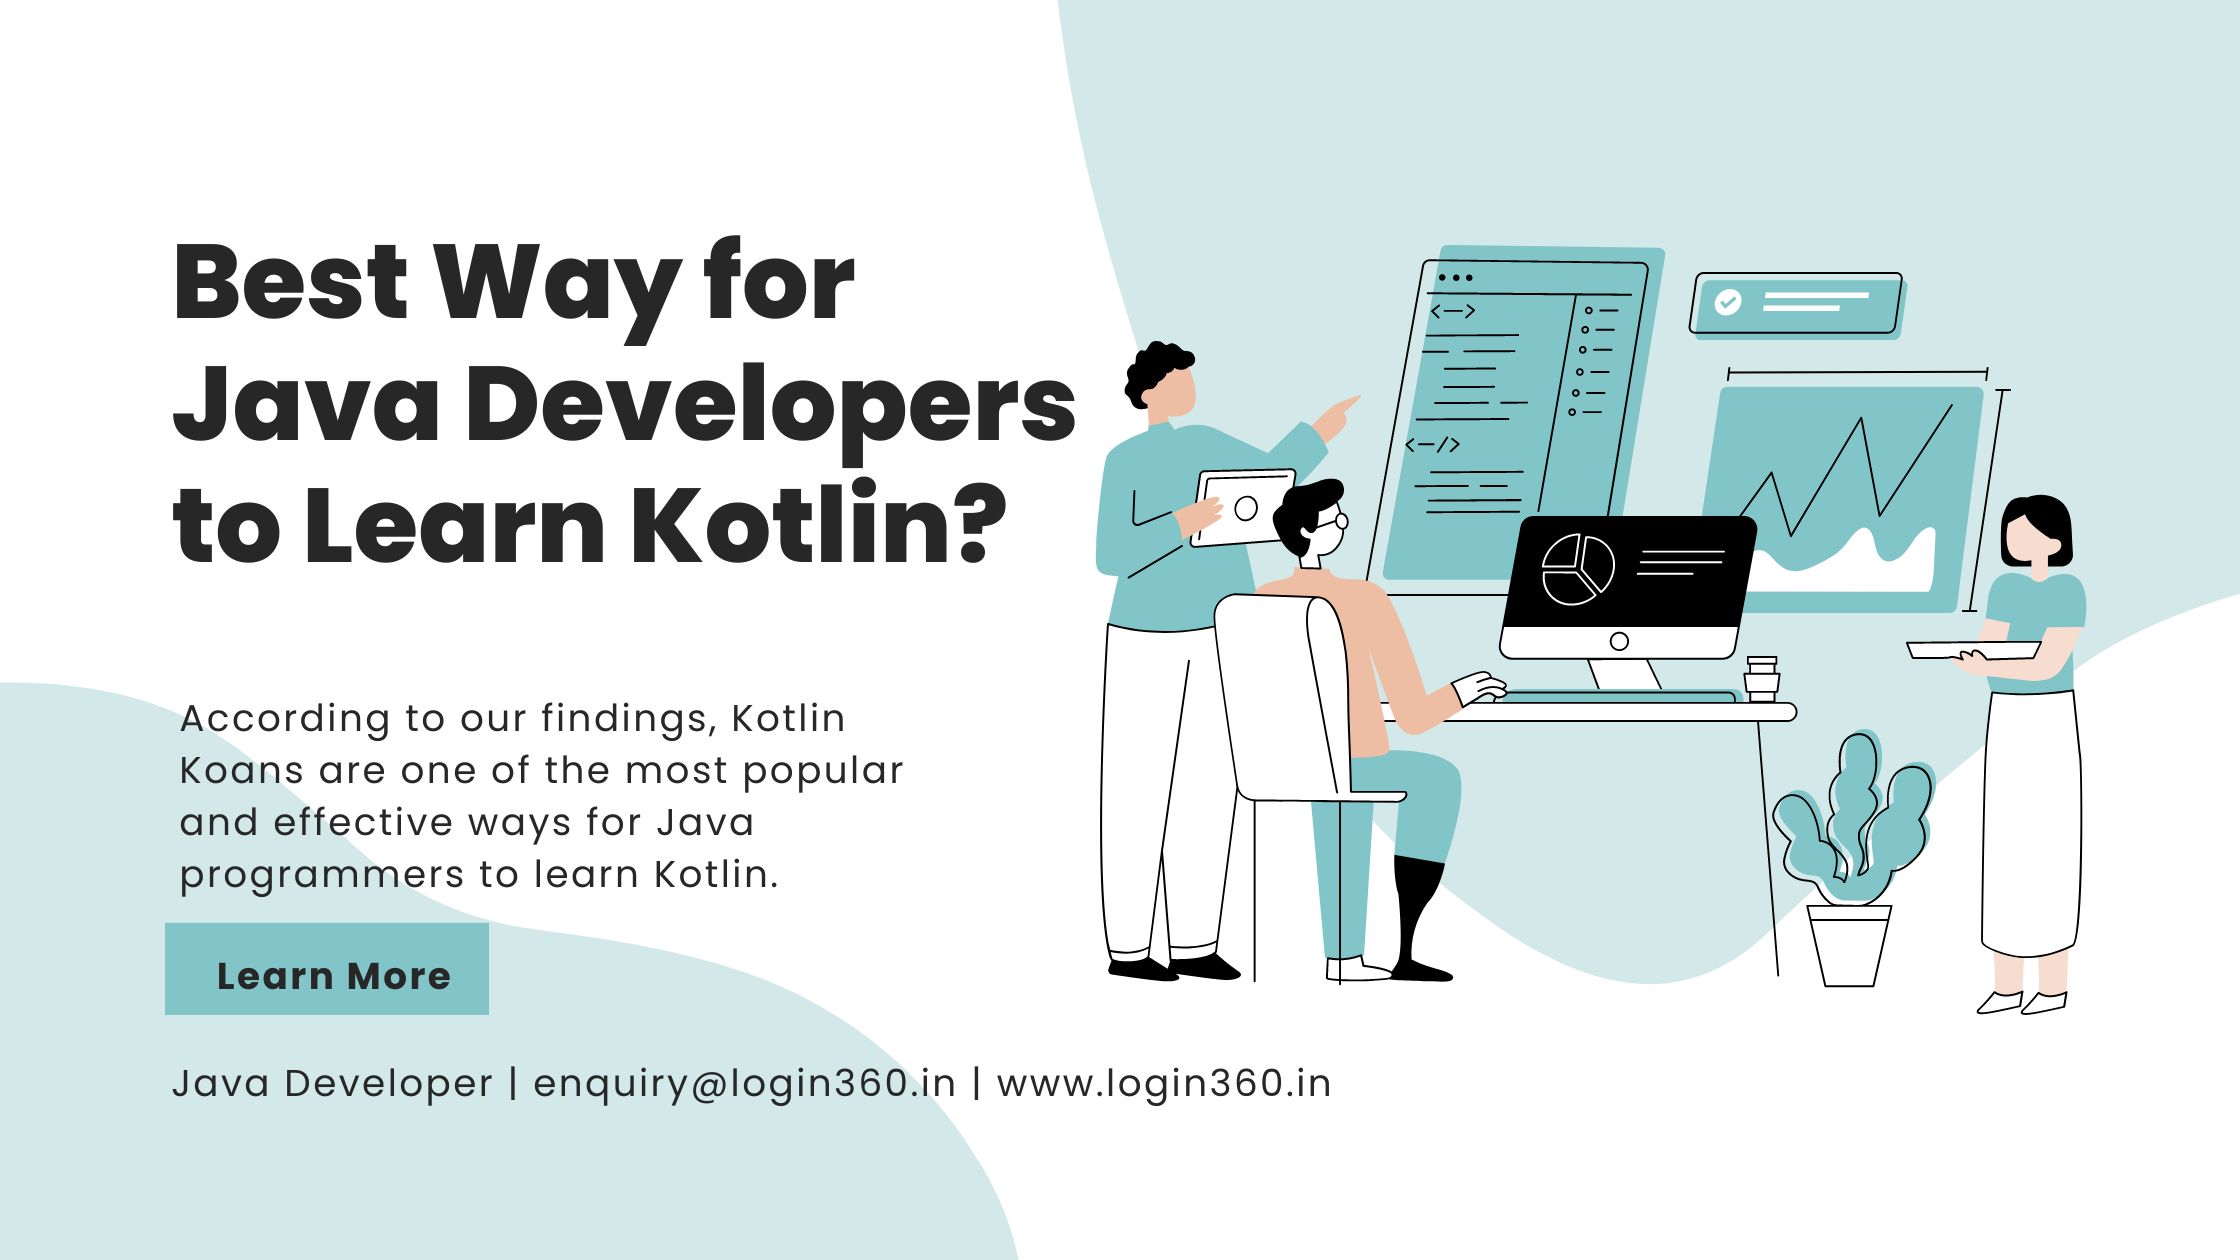 Best Way for Java Developers to Learn Kotlin?